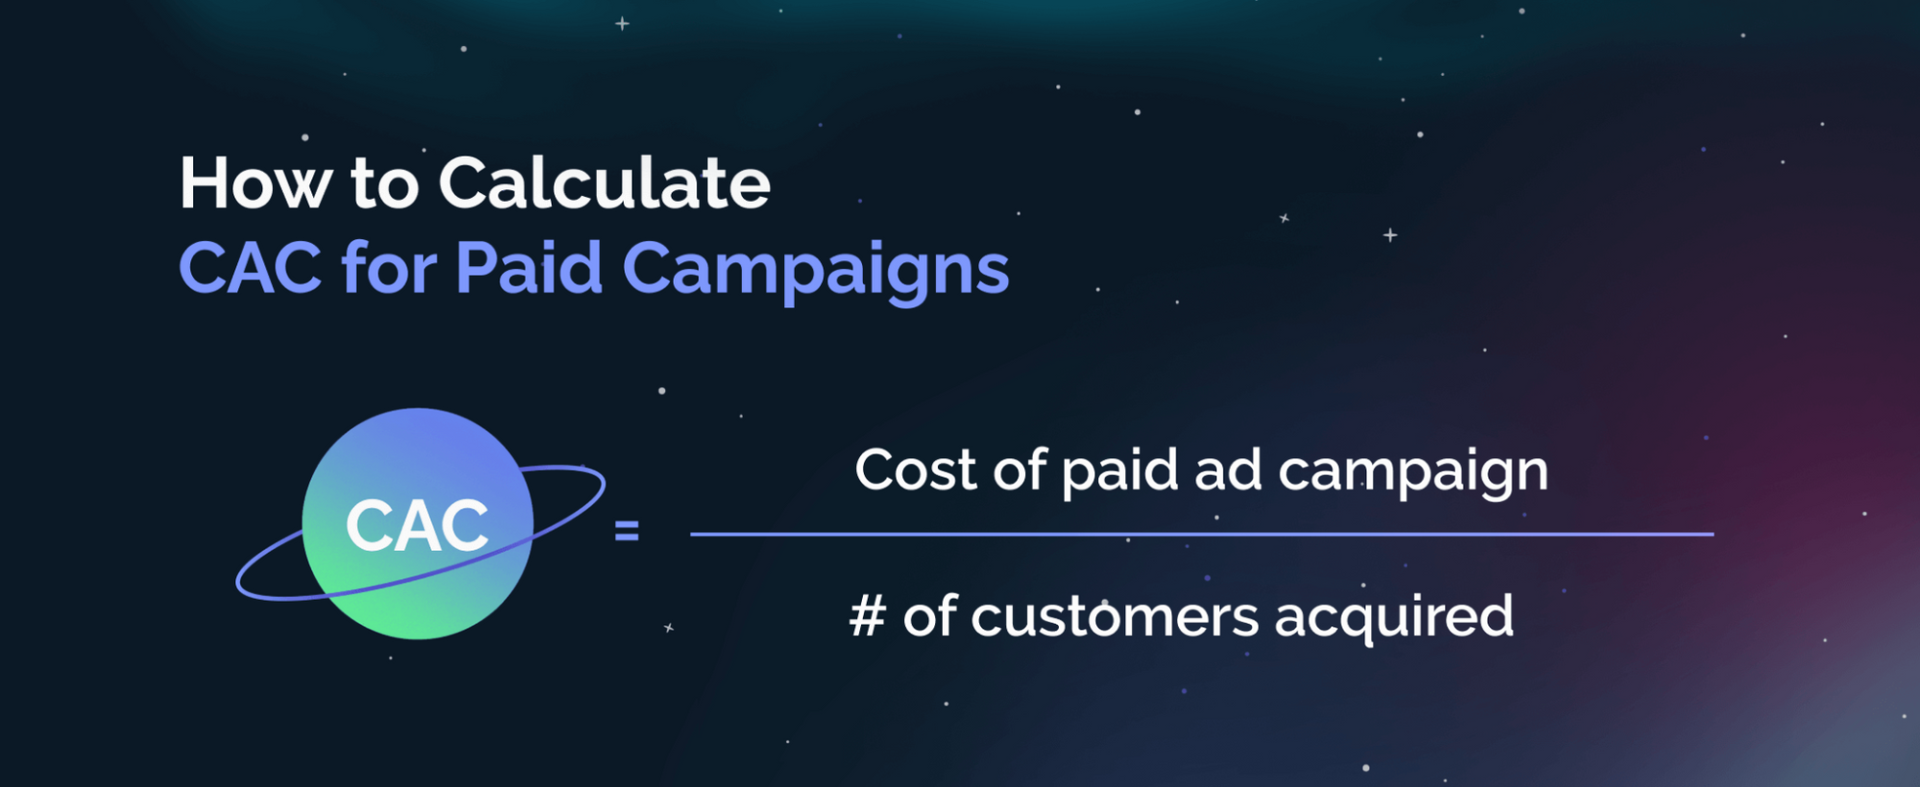 How to Calculate CAC for Paid Campaigns